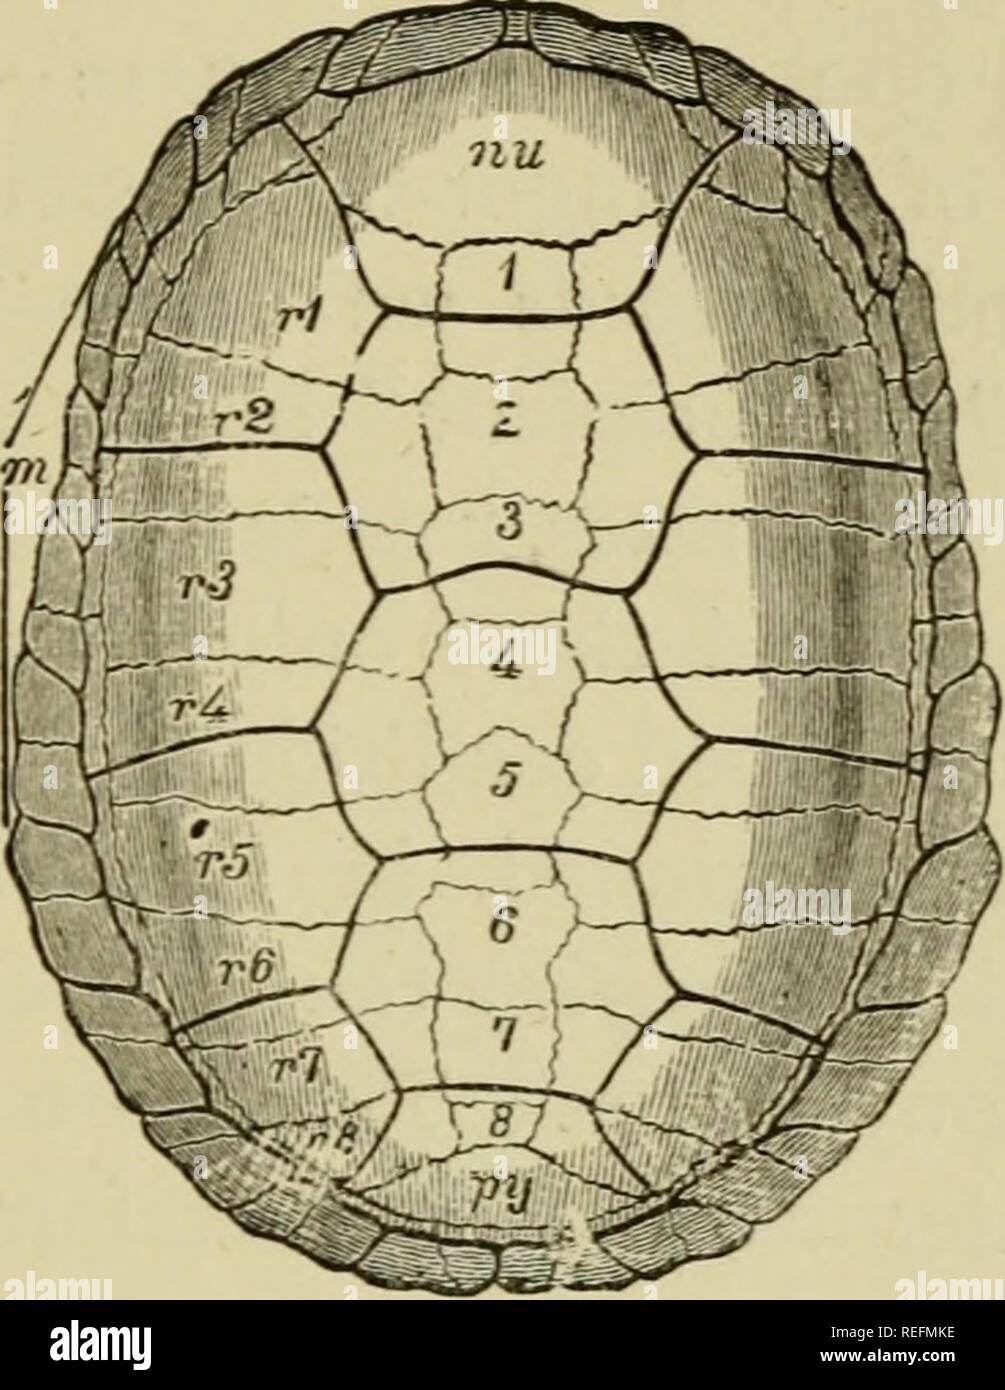 . The common frog. Frogs. VI. THE COMMON FROG. 6i appendages. Now both layers of the skin of the common Frog are entirely soft and utterly destitute. f'lG. 26.—Dorsal surface of the Carapace of a Fresh-water Tortoise (Emys). 1—^ expanded neutral spines ; r^—rS, expanded ribs ; nu, first median (or nuchaJ) plate ; Py, last median (or pygal) plate ; m, marginal scutes. The dark lines indicate the limits of the plates of the homy epidermal lortoise-shell; the thiu sutures indicate the lines at the junction of the bony scutes.. Please note that these images are extracted from scanned page images t Stock Photo